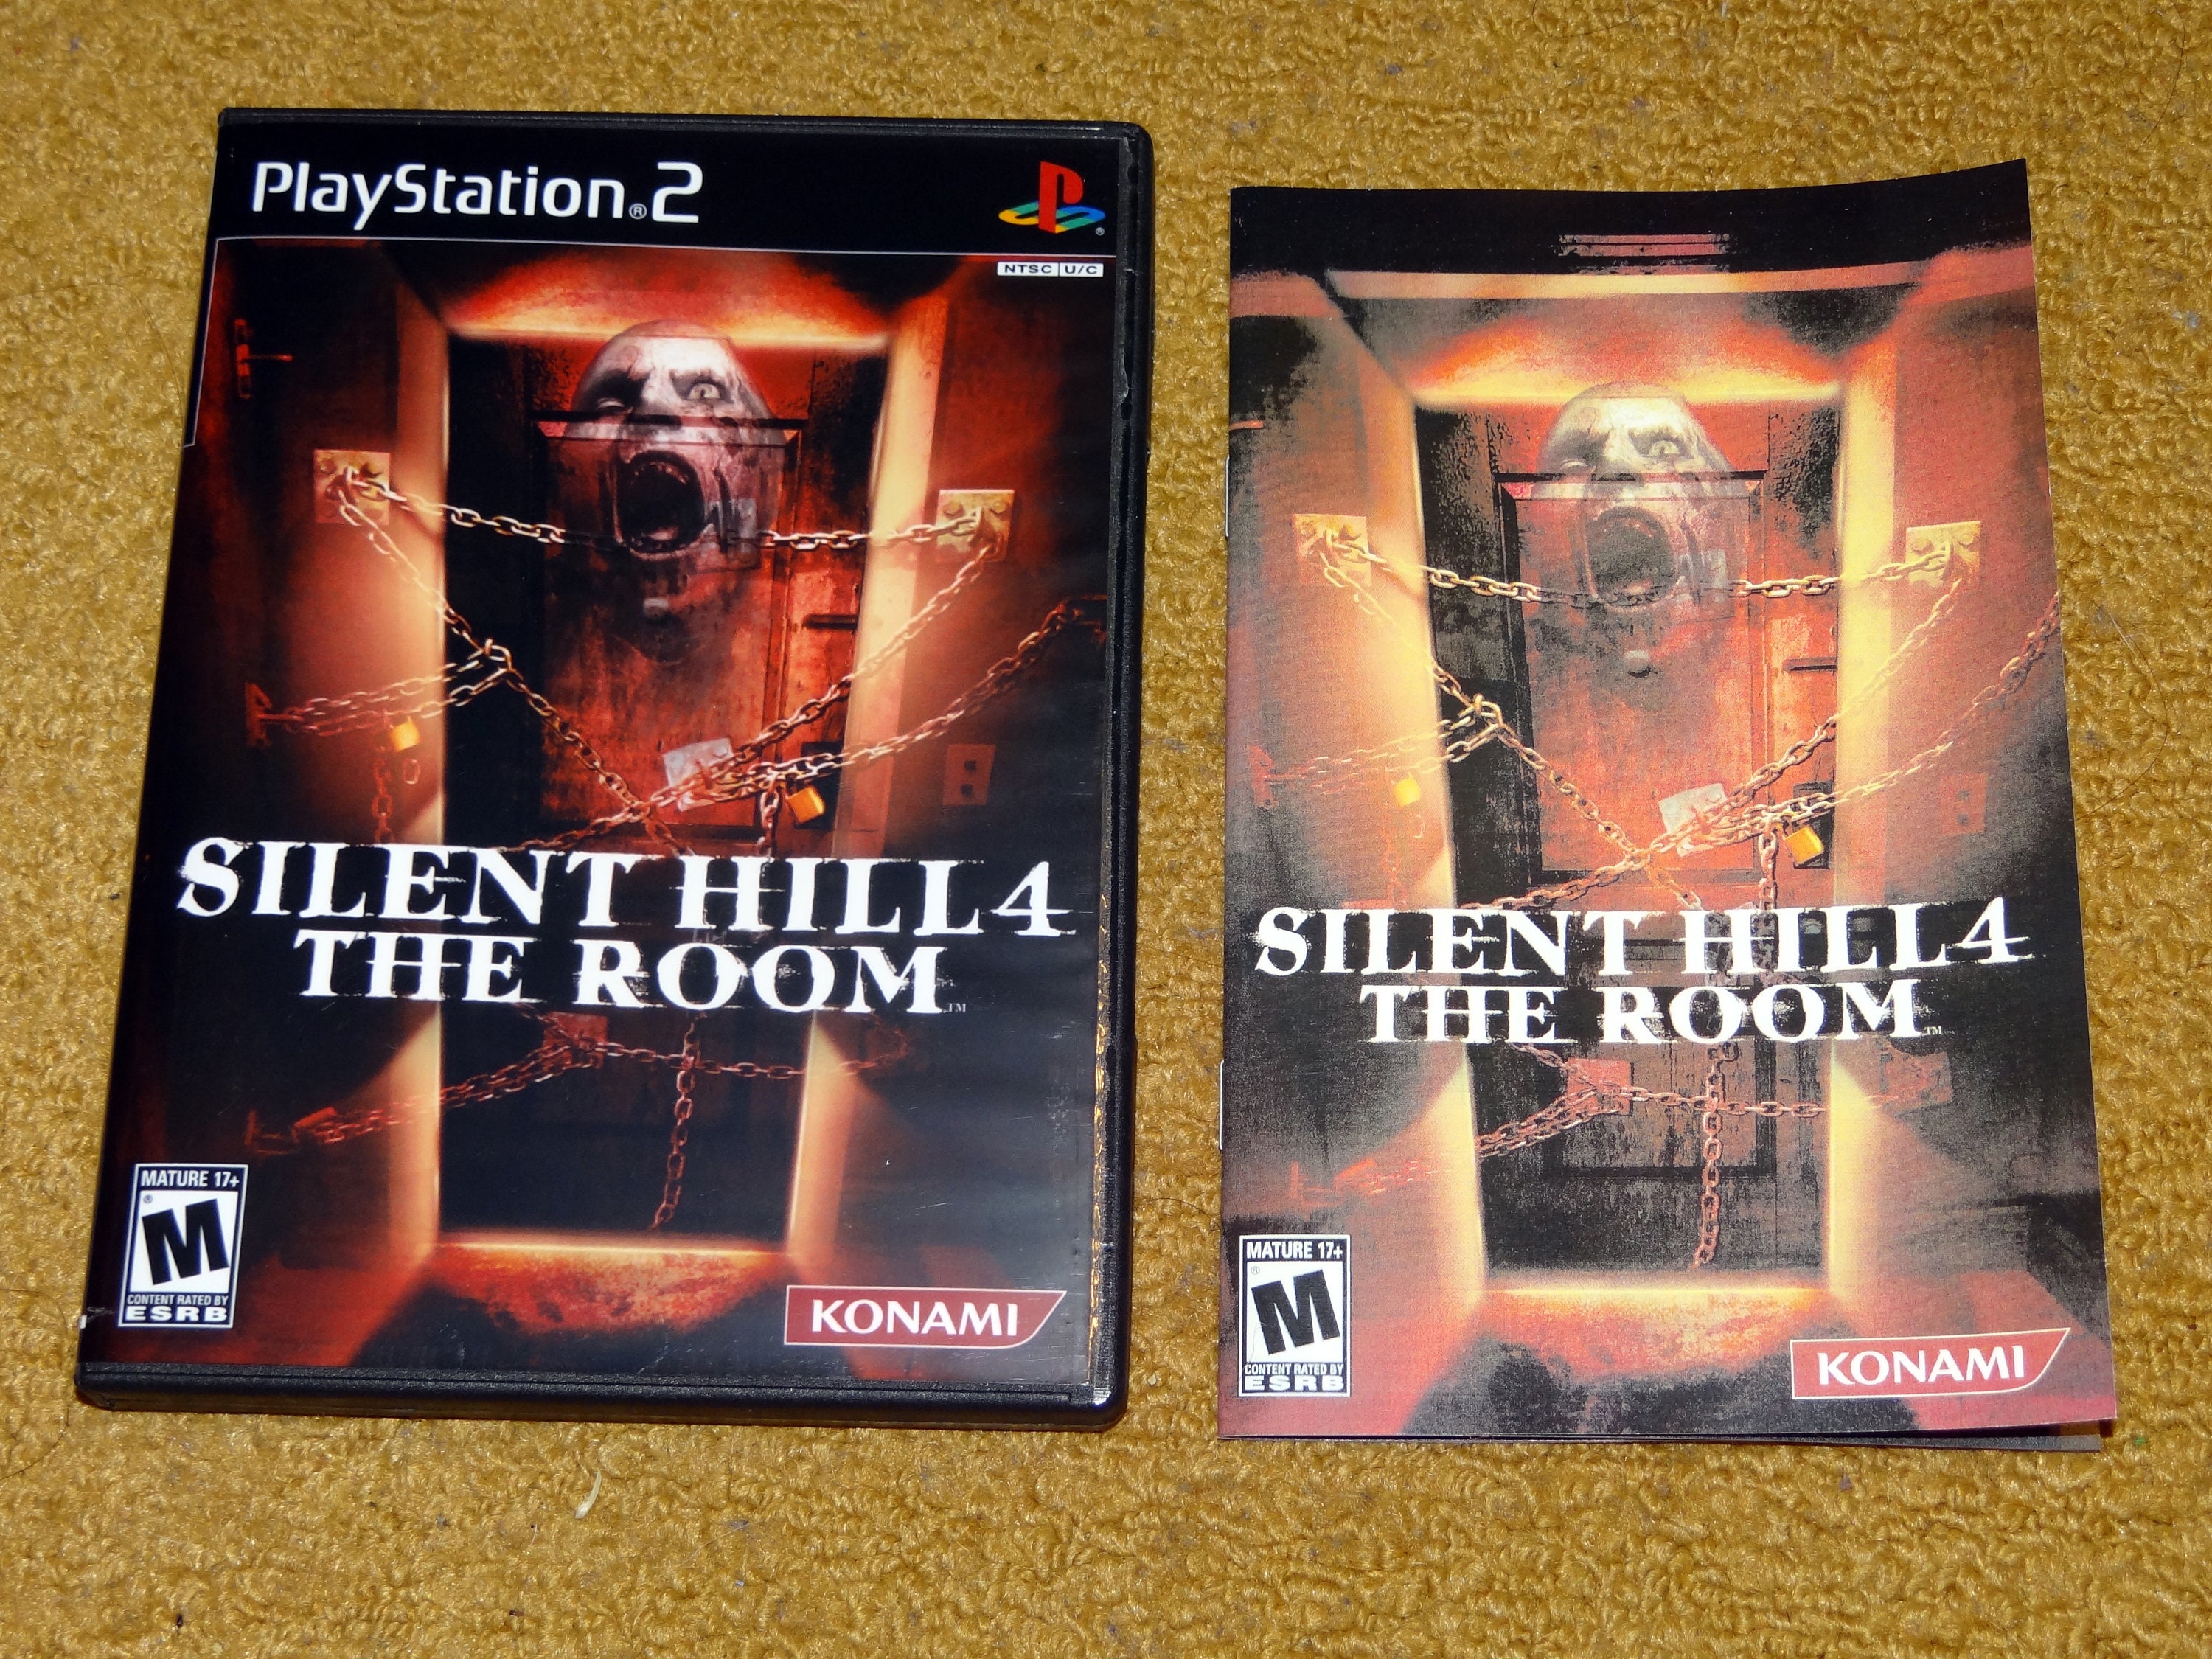 SILENT HILL 4 (THE ROOM) in 2023